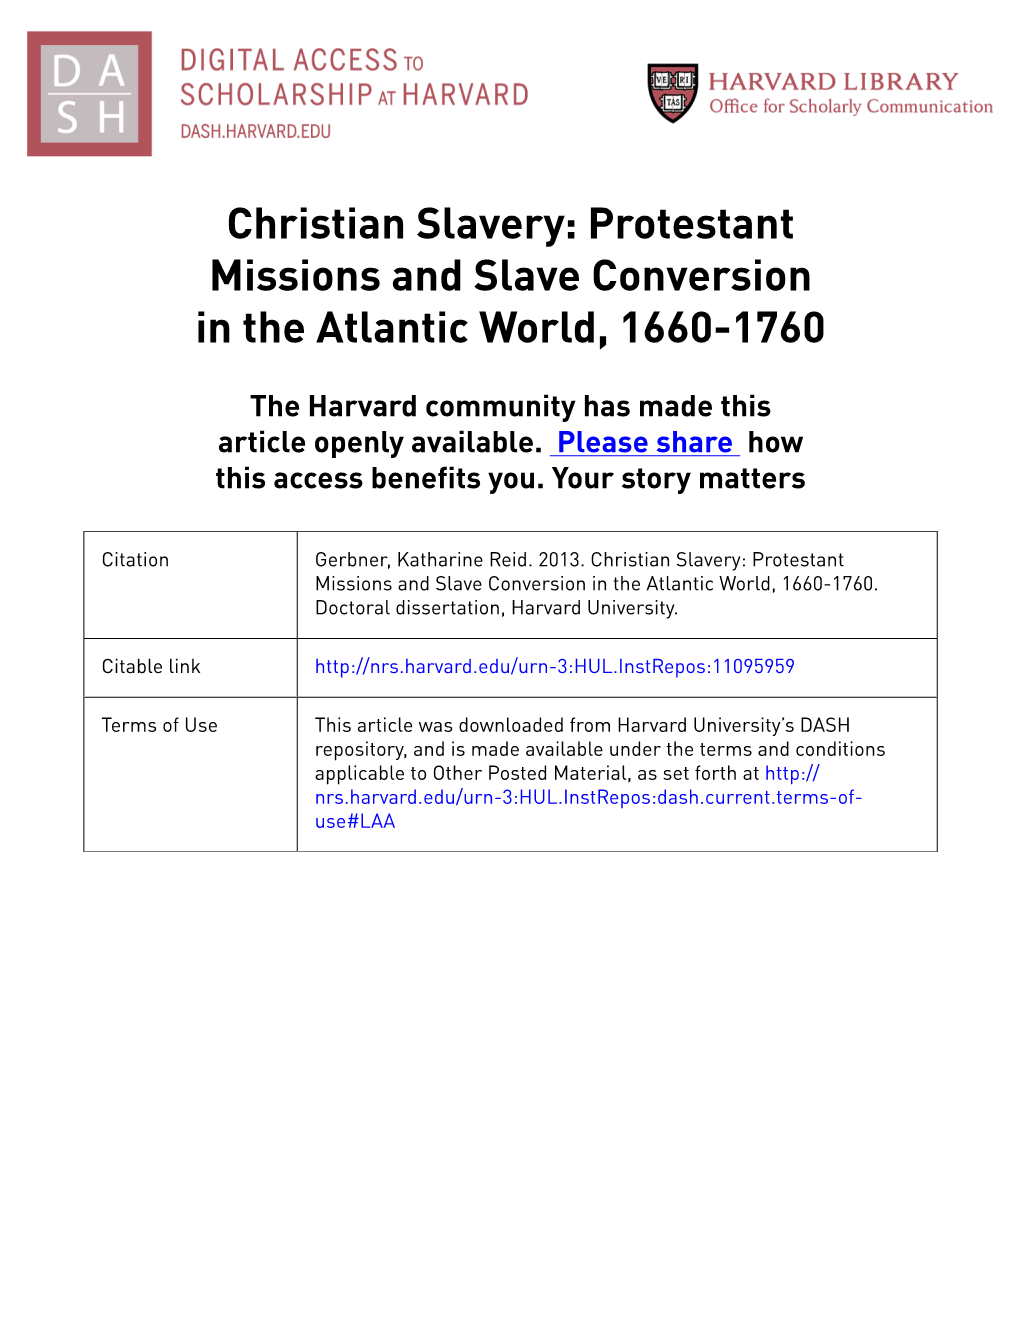 Christian Slavery: Protestant Missions and Slave Conversion in the Atlantic World, 1660-1760